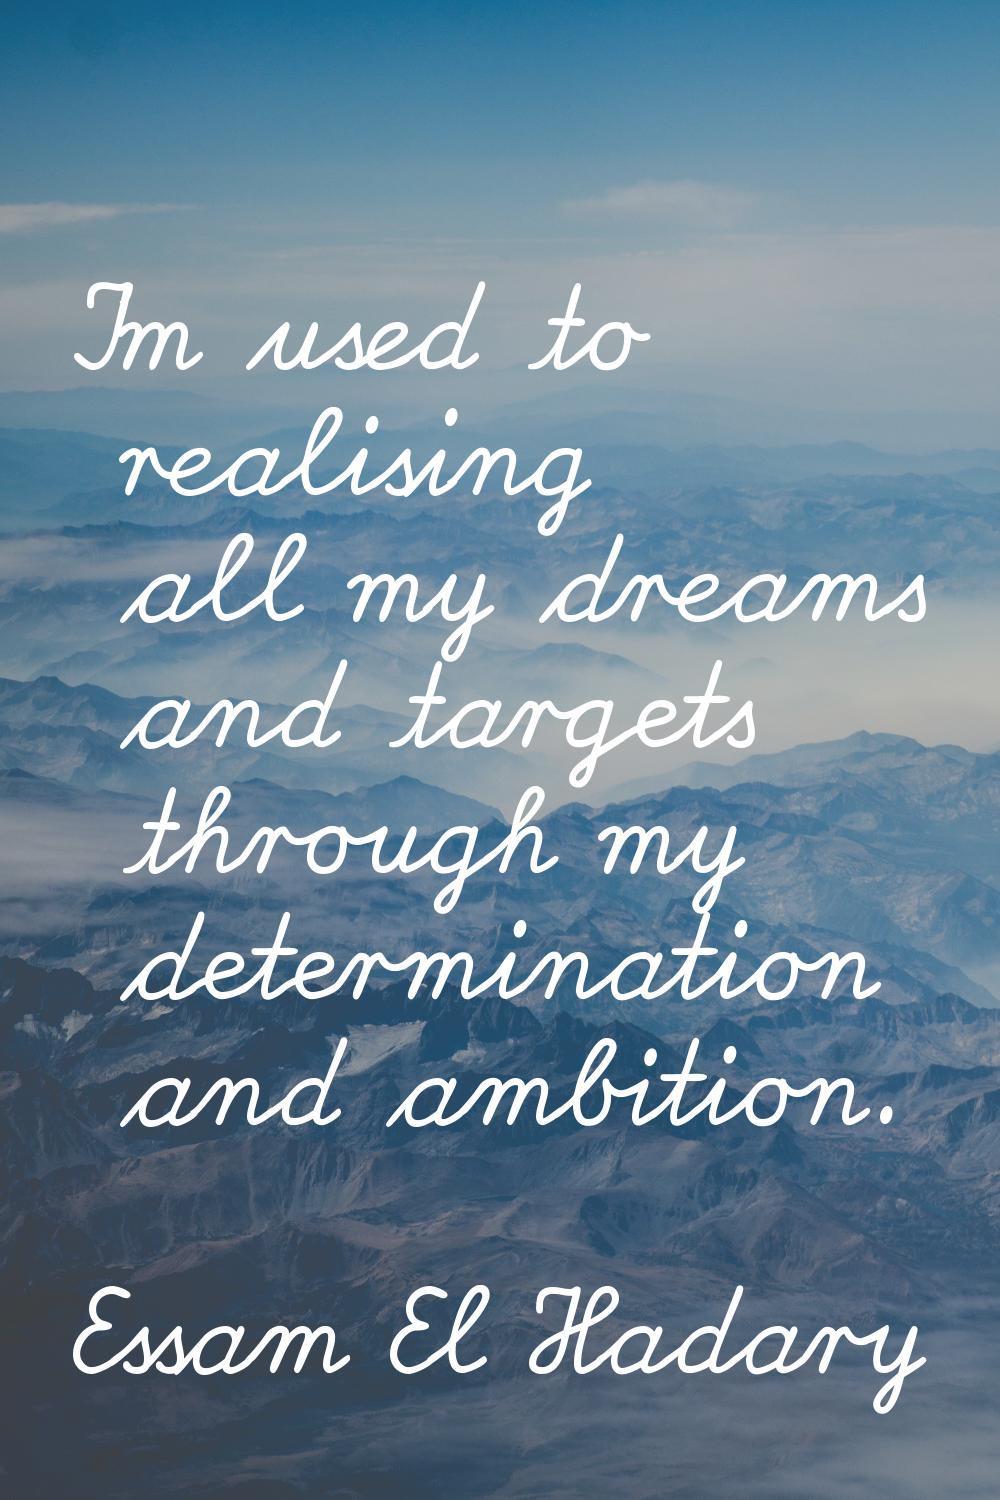 I'm used to realising all my dreams and targets through my determination and ambition.